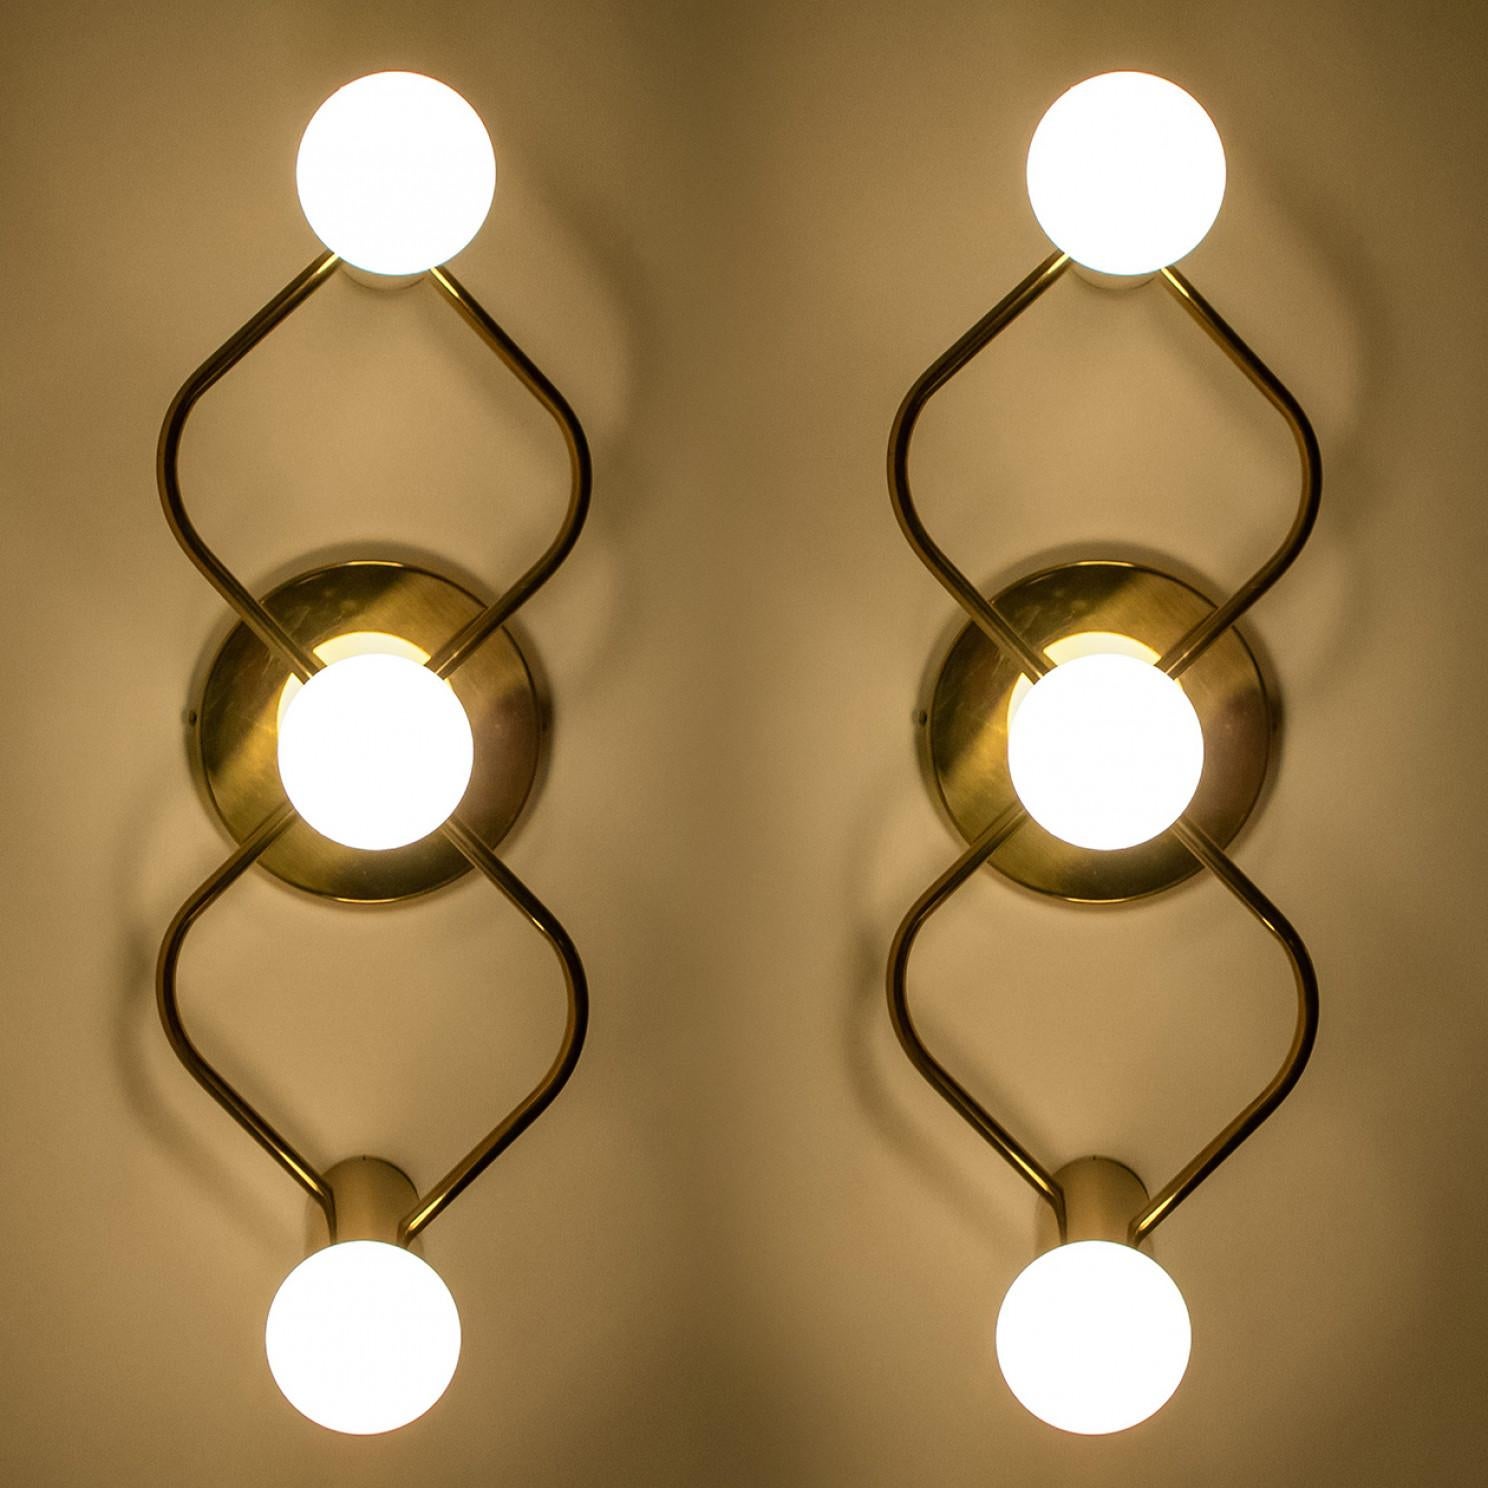 Pair of Sculptural Brass Wall Lights Flush Mounts by Leola, 1970s For Sale 4